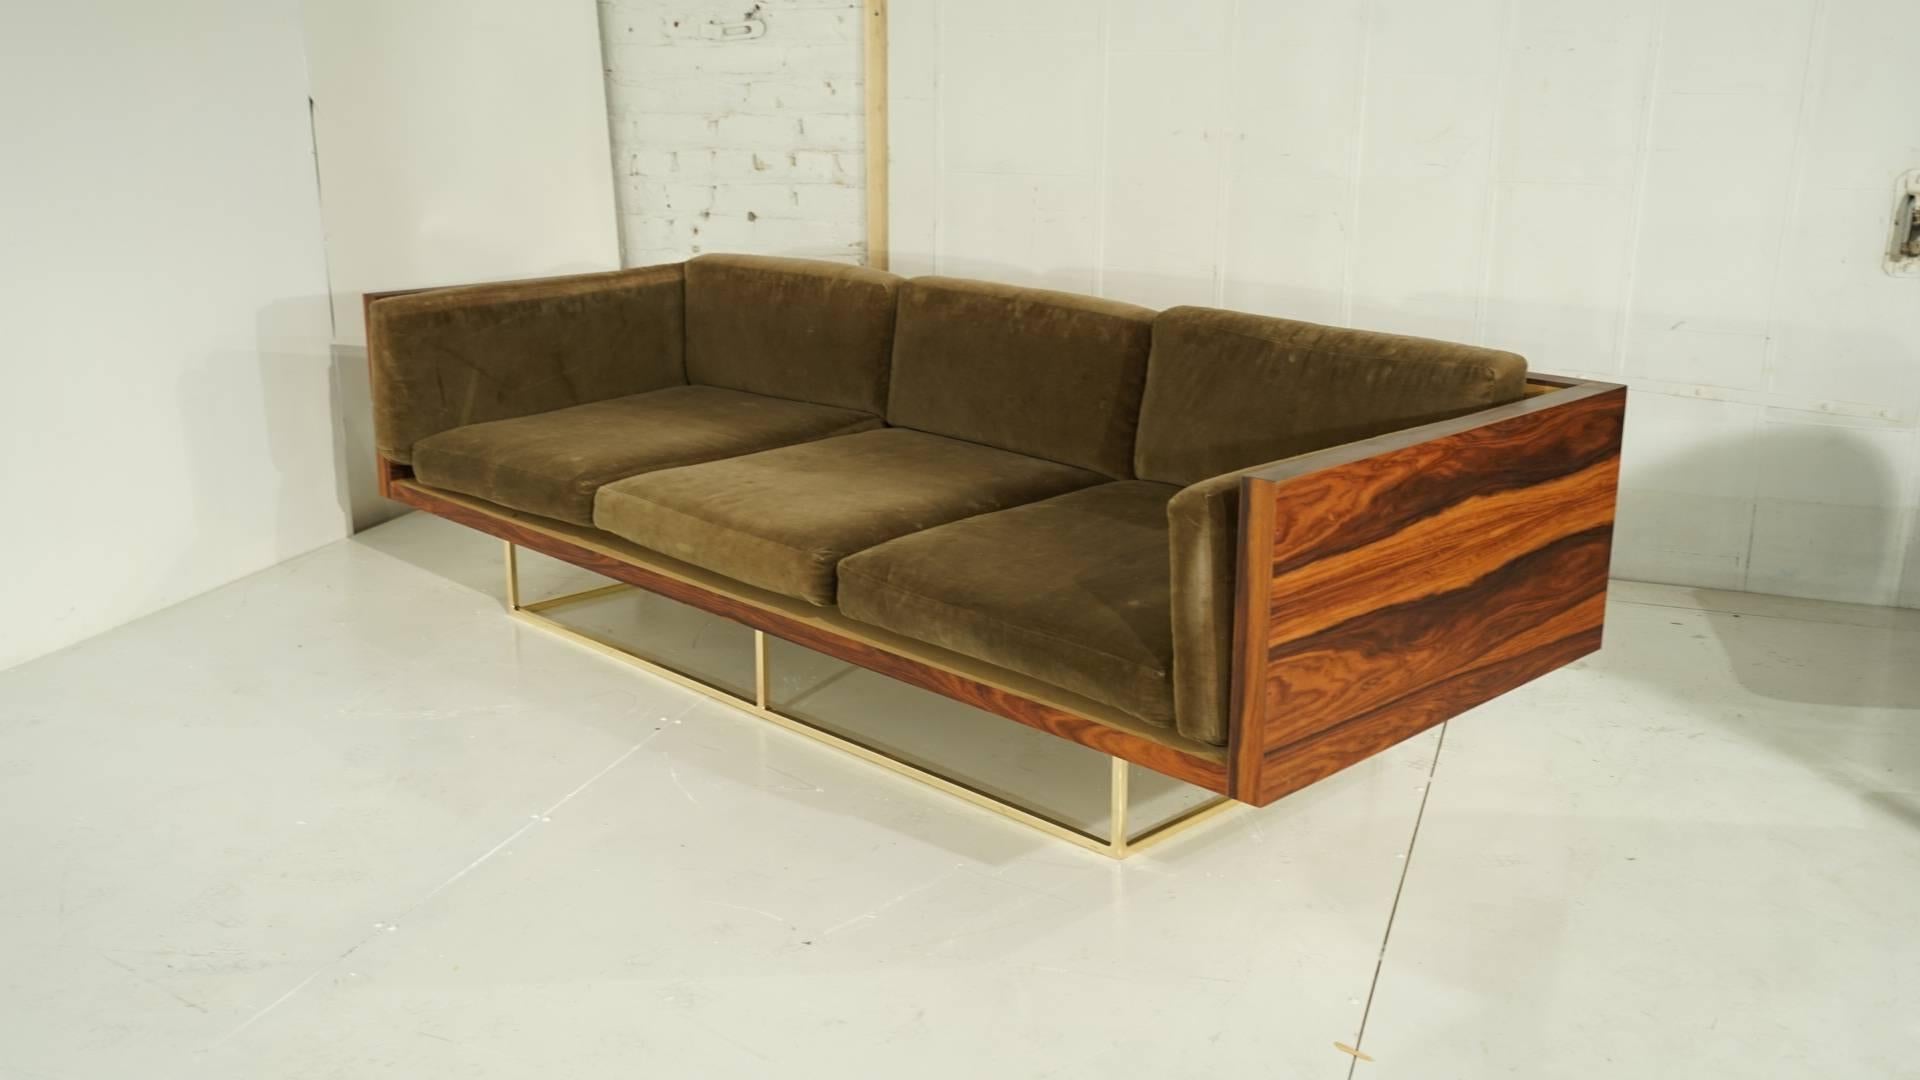 Absolutely gorgeous rosewood Tuxedo or wood case sofa floating on polished brass frame by Loft Thirteen Gallery, also available in dark walnut burl wood. Any custom sizes please contact Loft Thirteen. 

Very high quality with the best